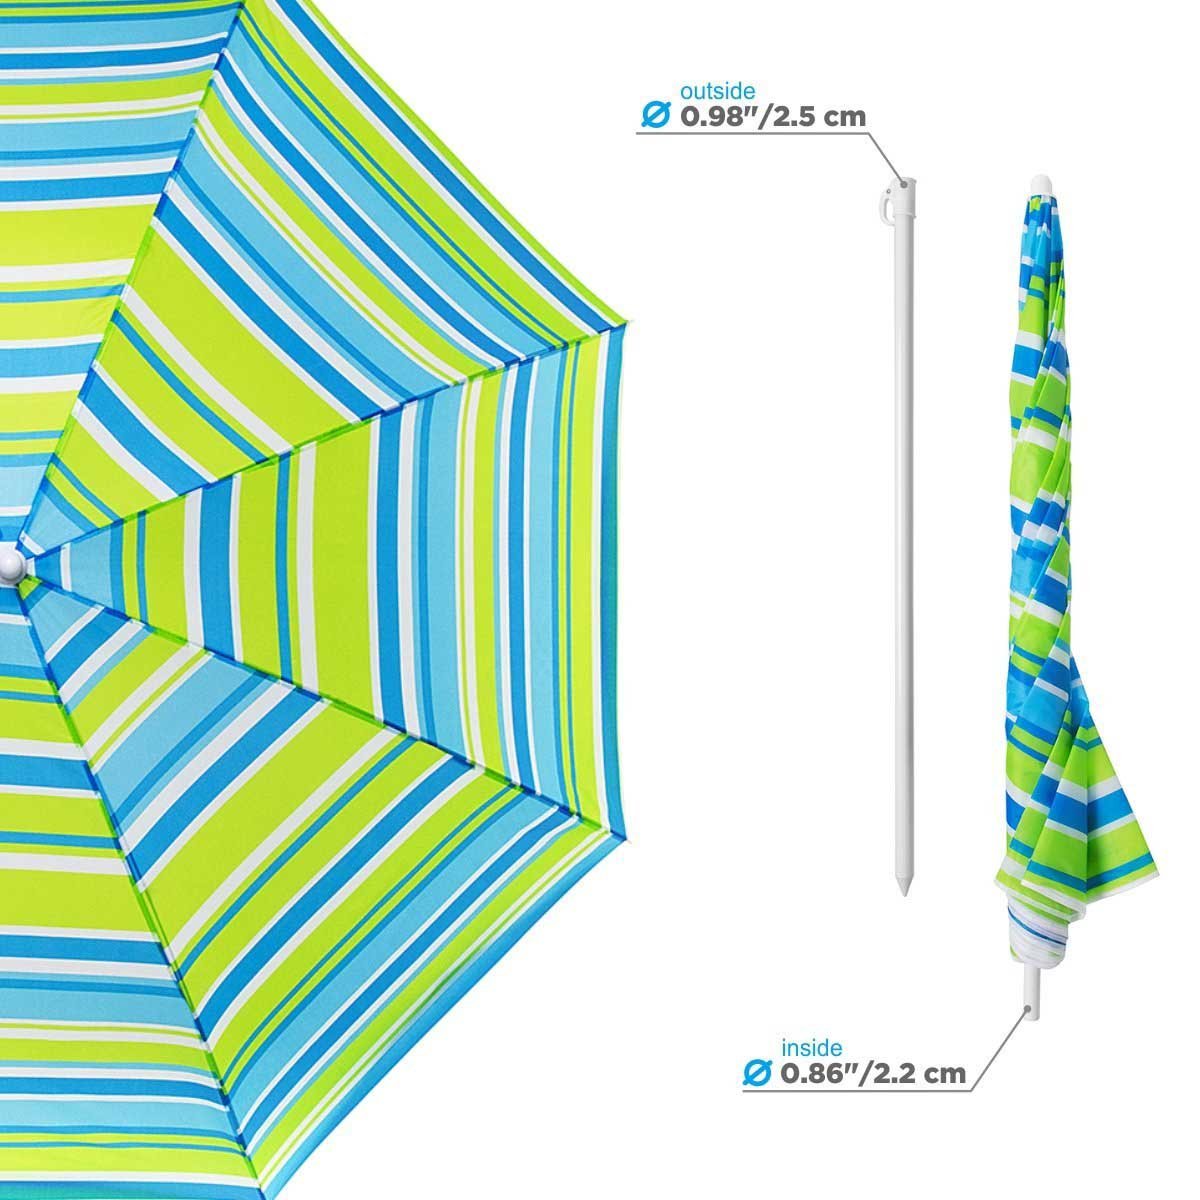 Sea-Green Folding Beach Umbrella is made of waterproof polyester 170T featuring UV protection